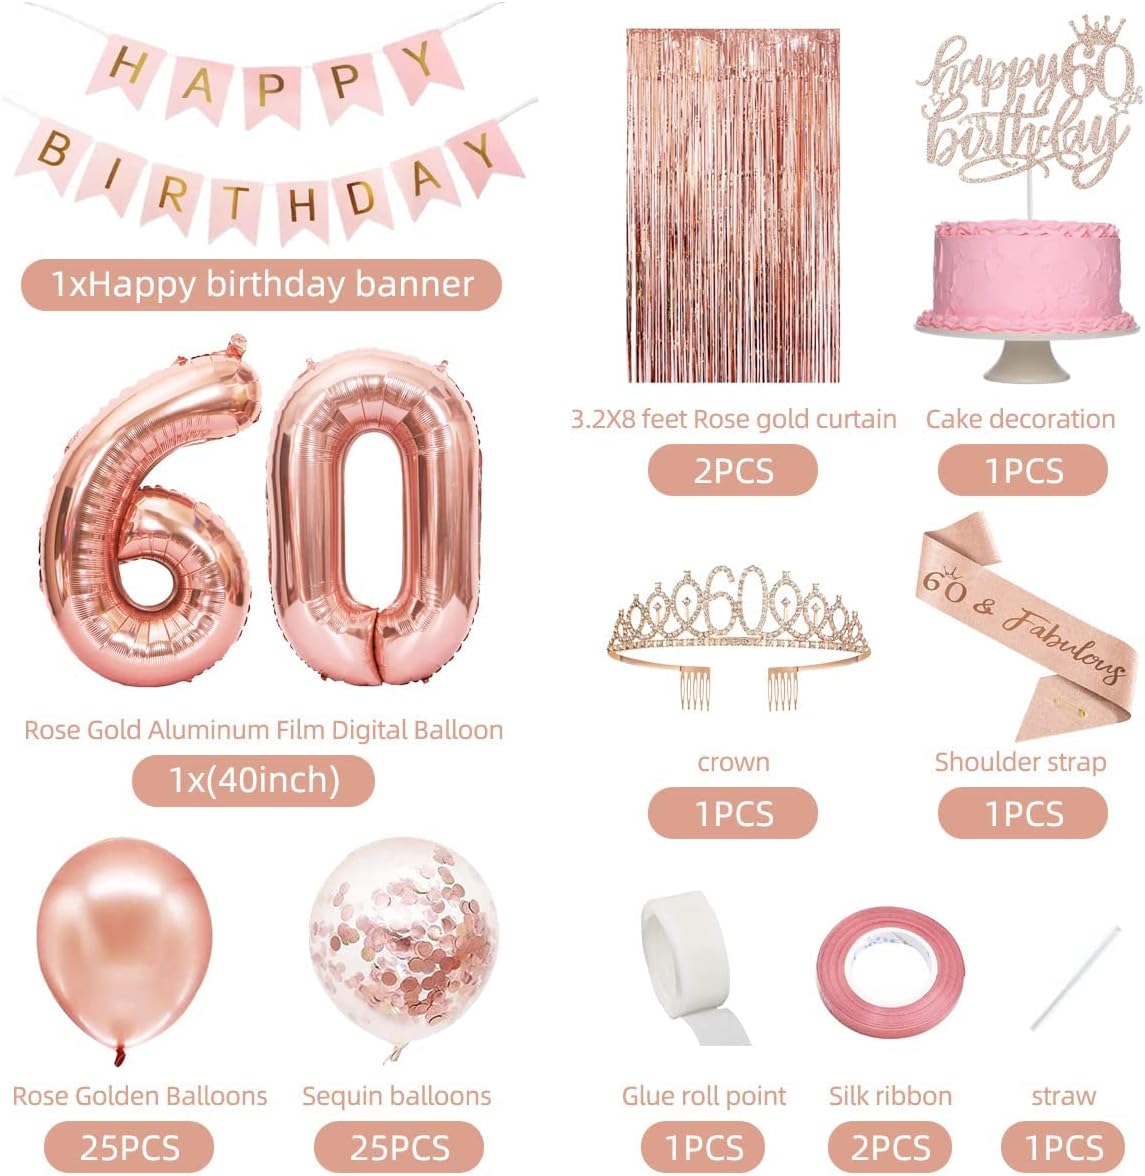 60th Birthday Decorations Women, Rose Gold 60 Birthday Party Decorations for Women, Happy 60th Birthday Banner, Crown, Sash, Cake Topper and Number Balloon, 60th Birthday Gifts for Women Decorations